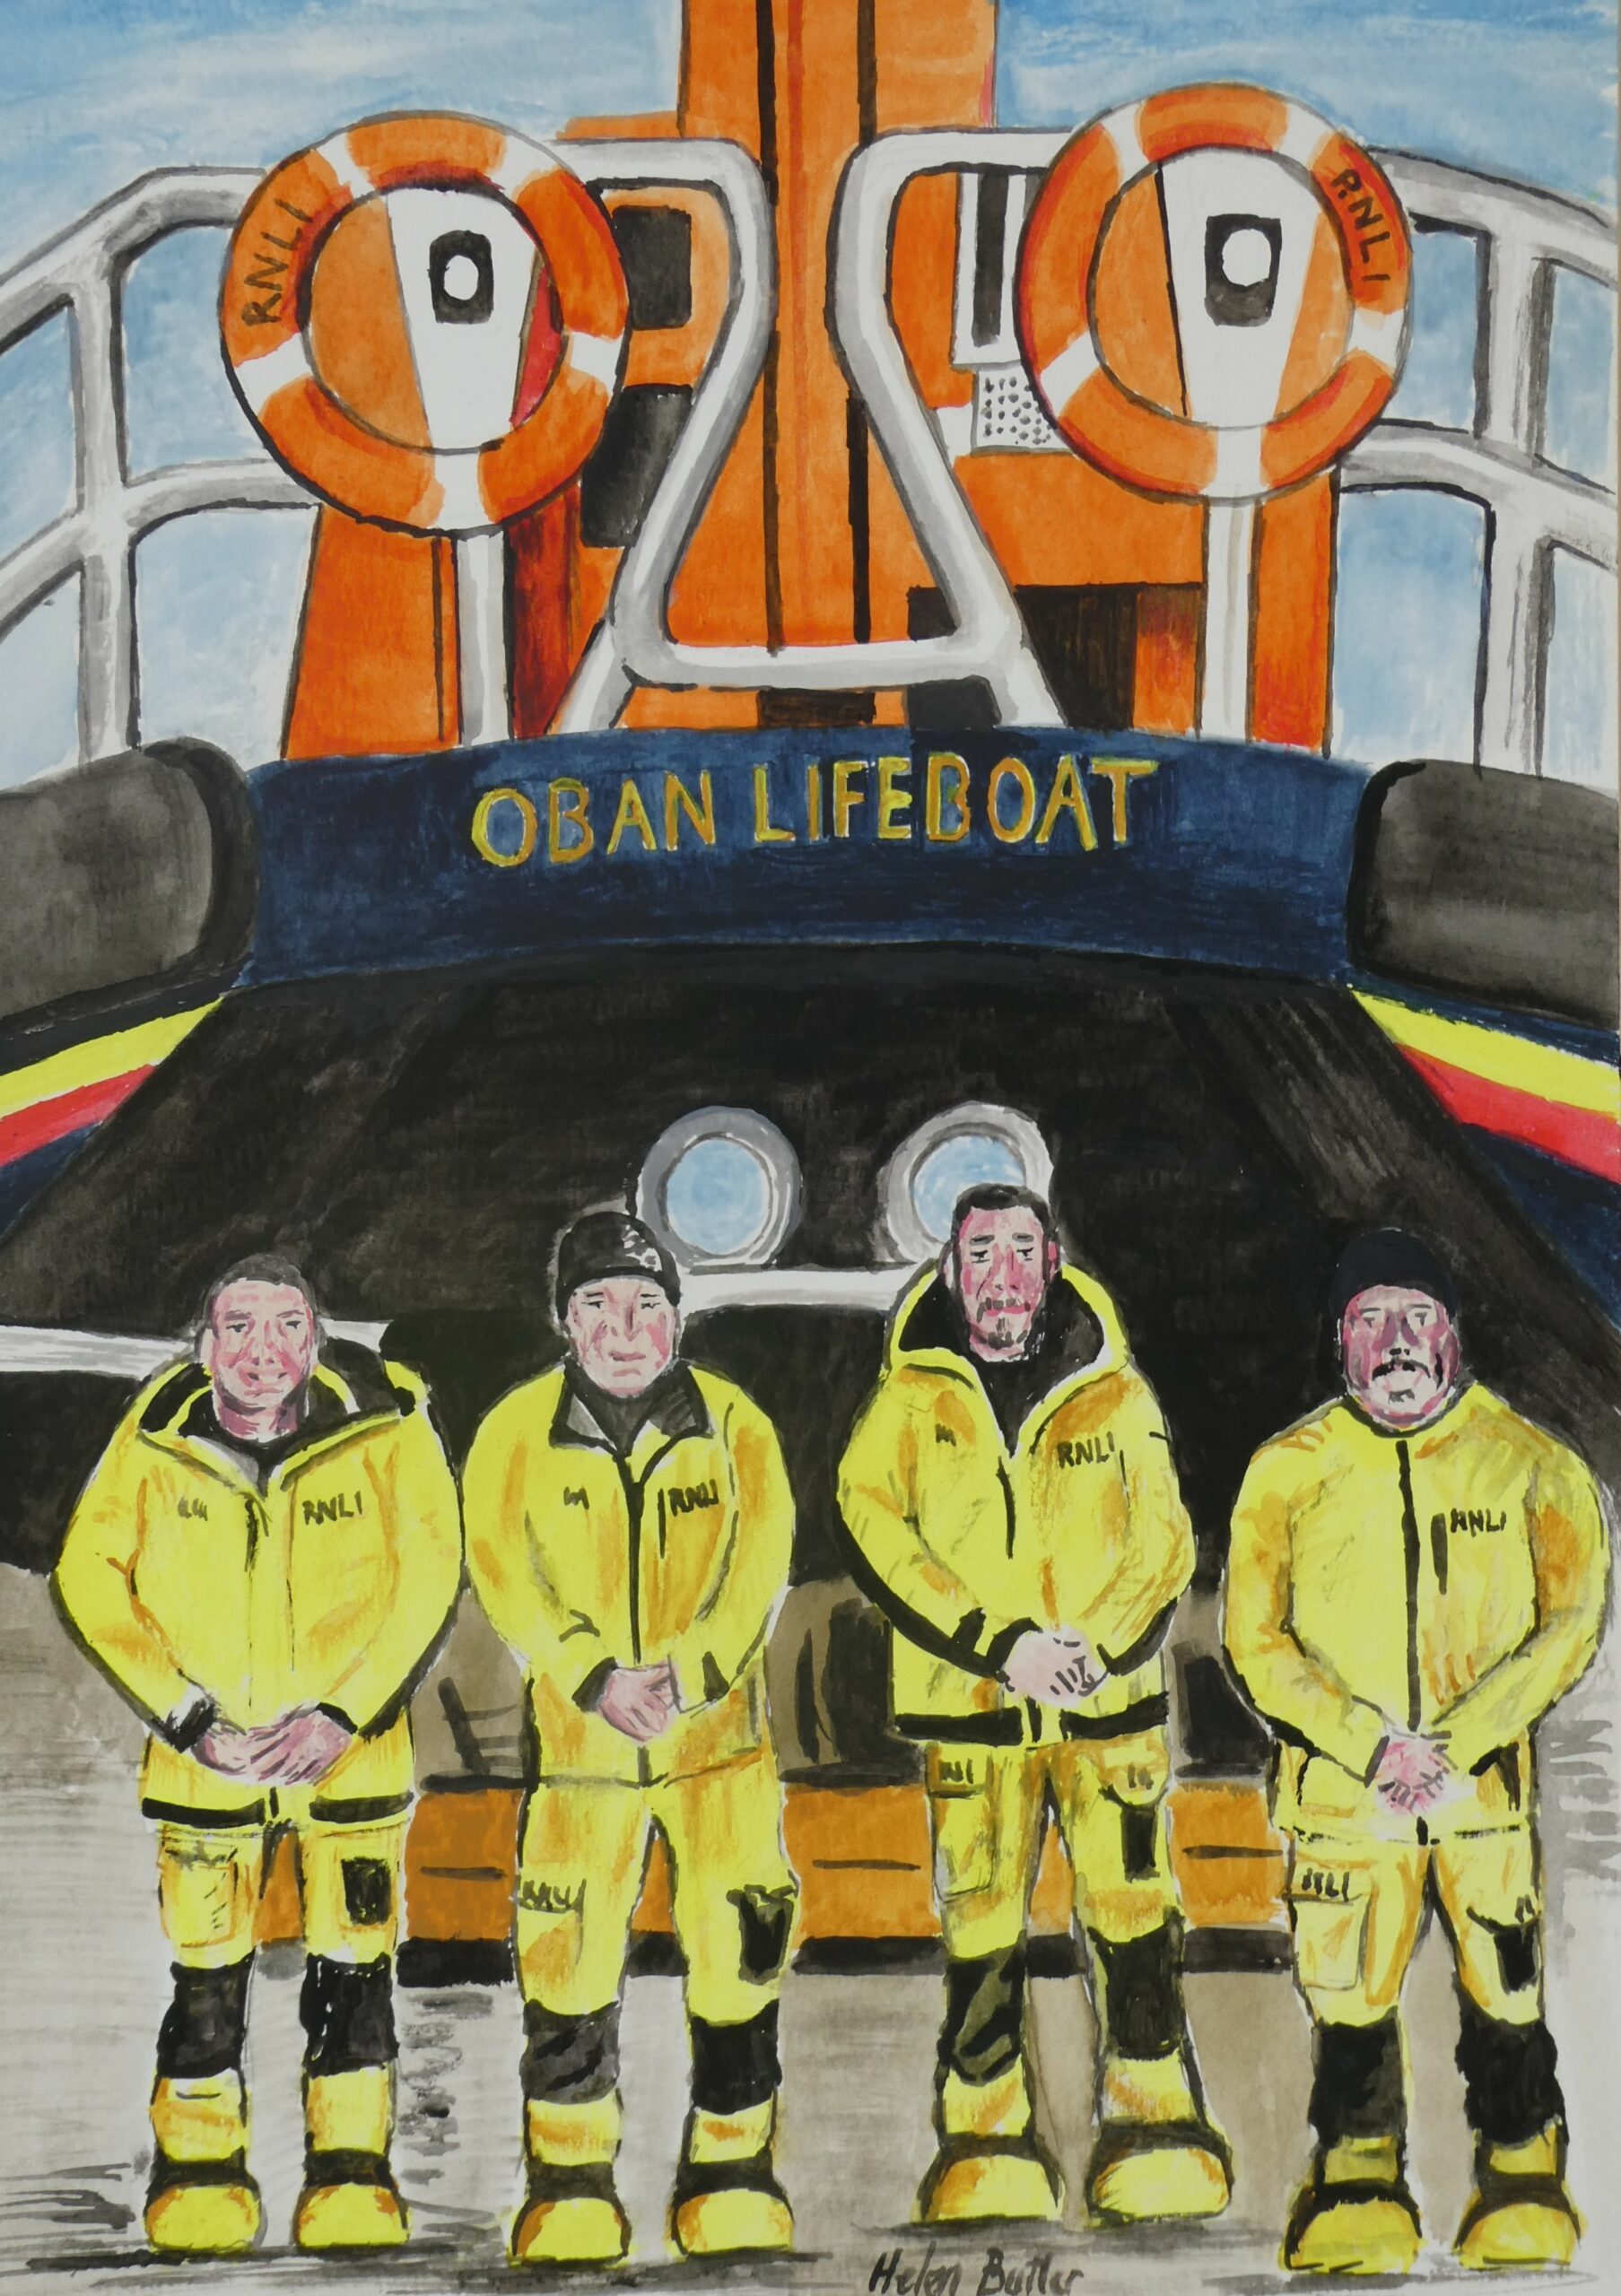 Oban Lifeboat and crew